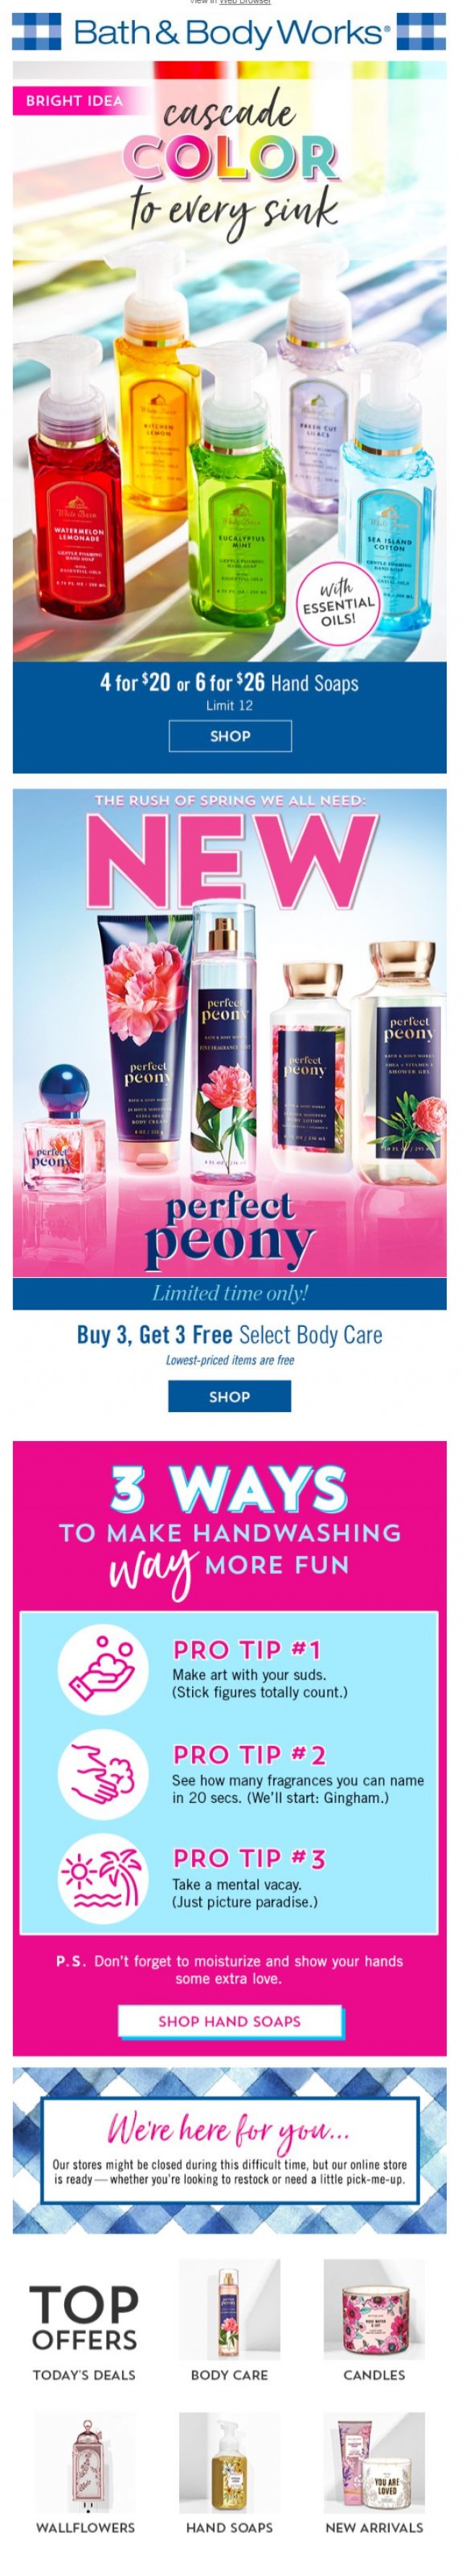 Coupon for: Bath & Body Works - Bright idea - cascade color to every sink!